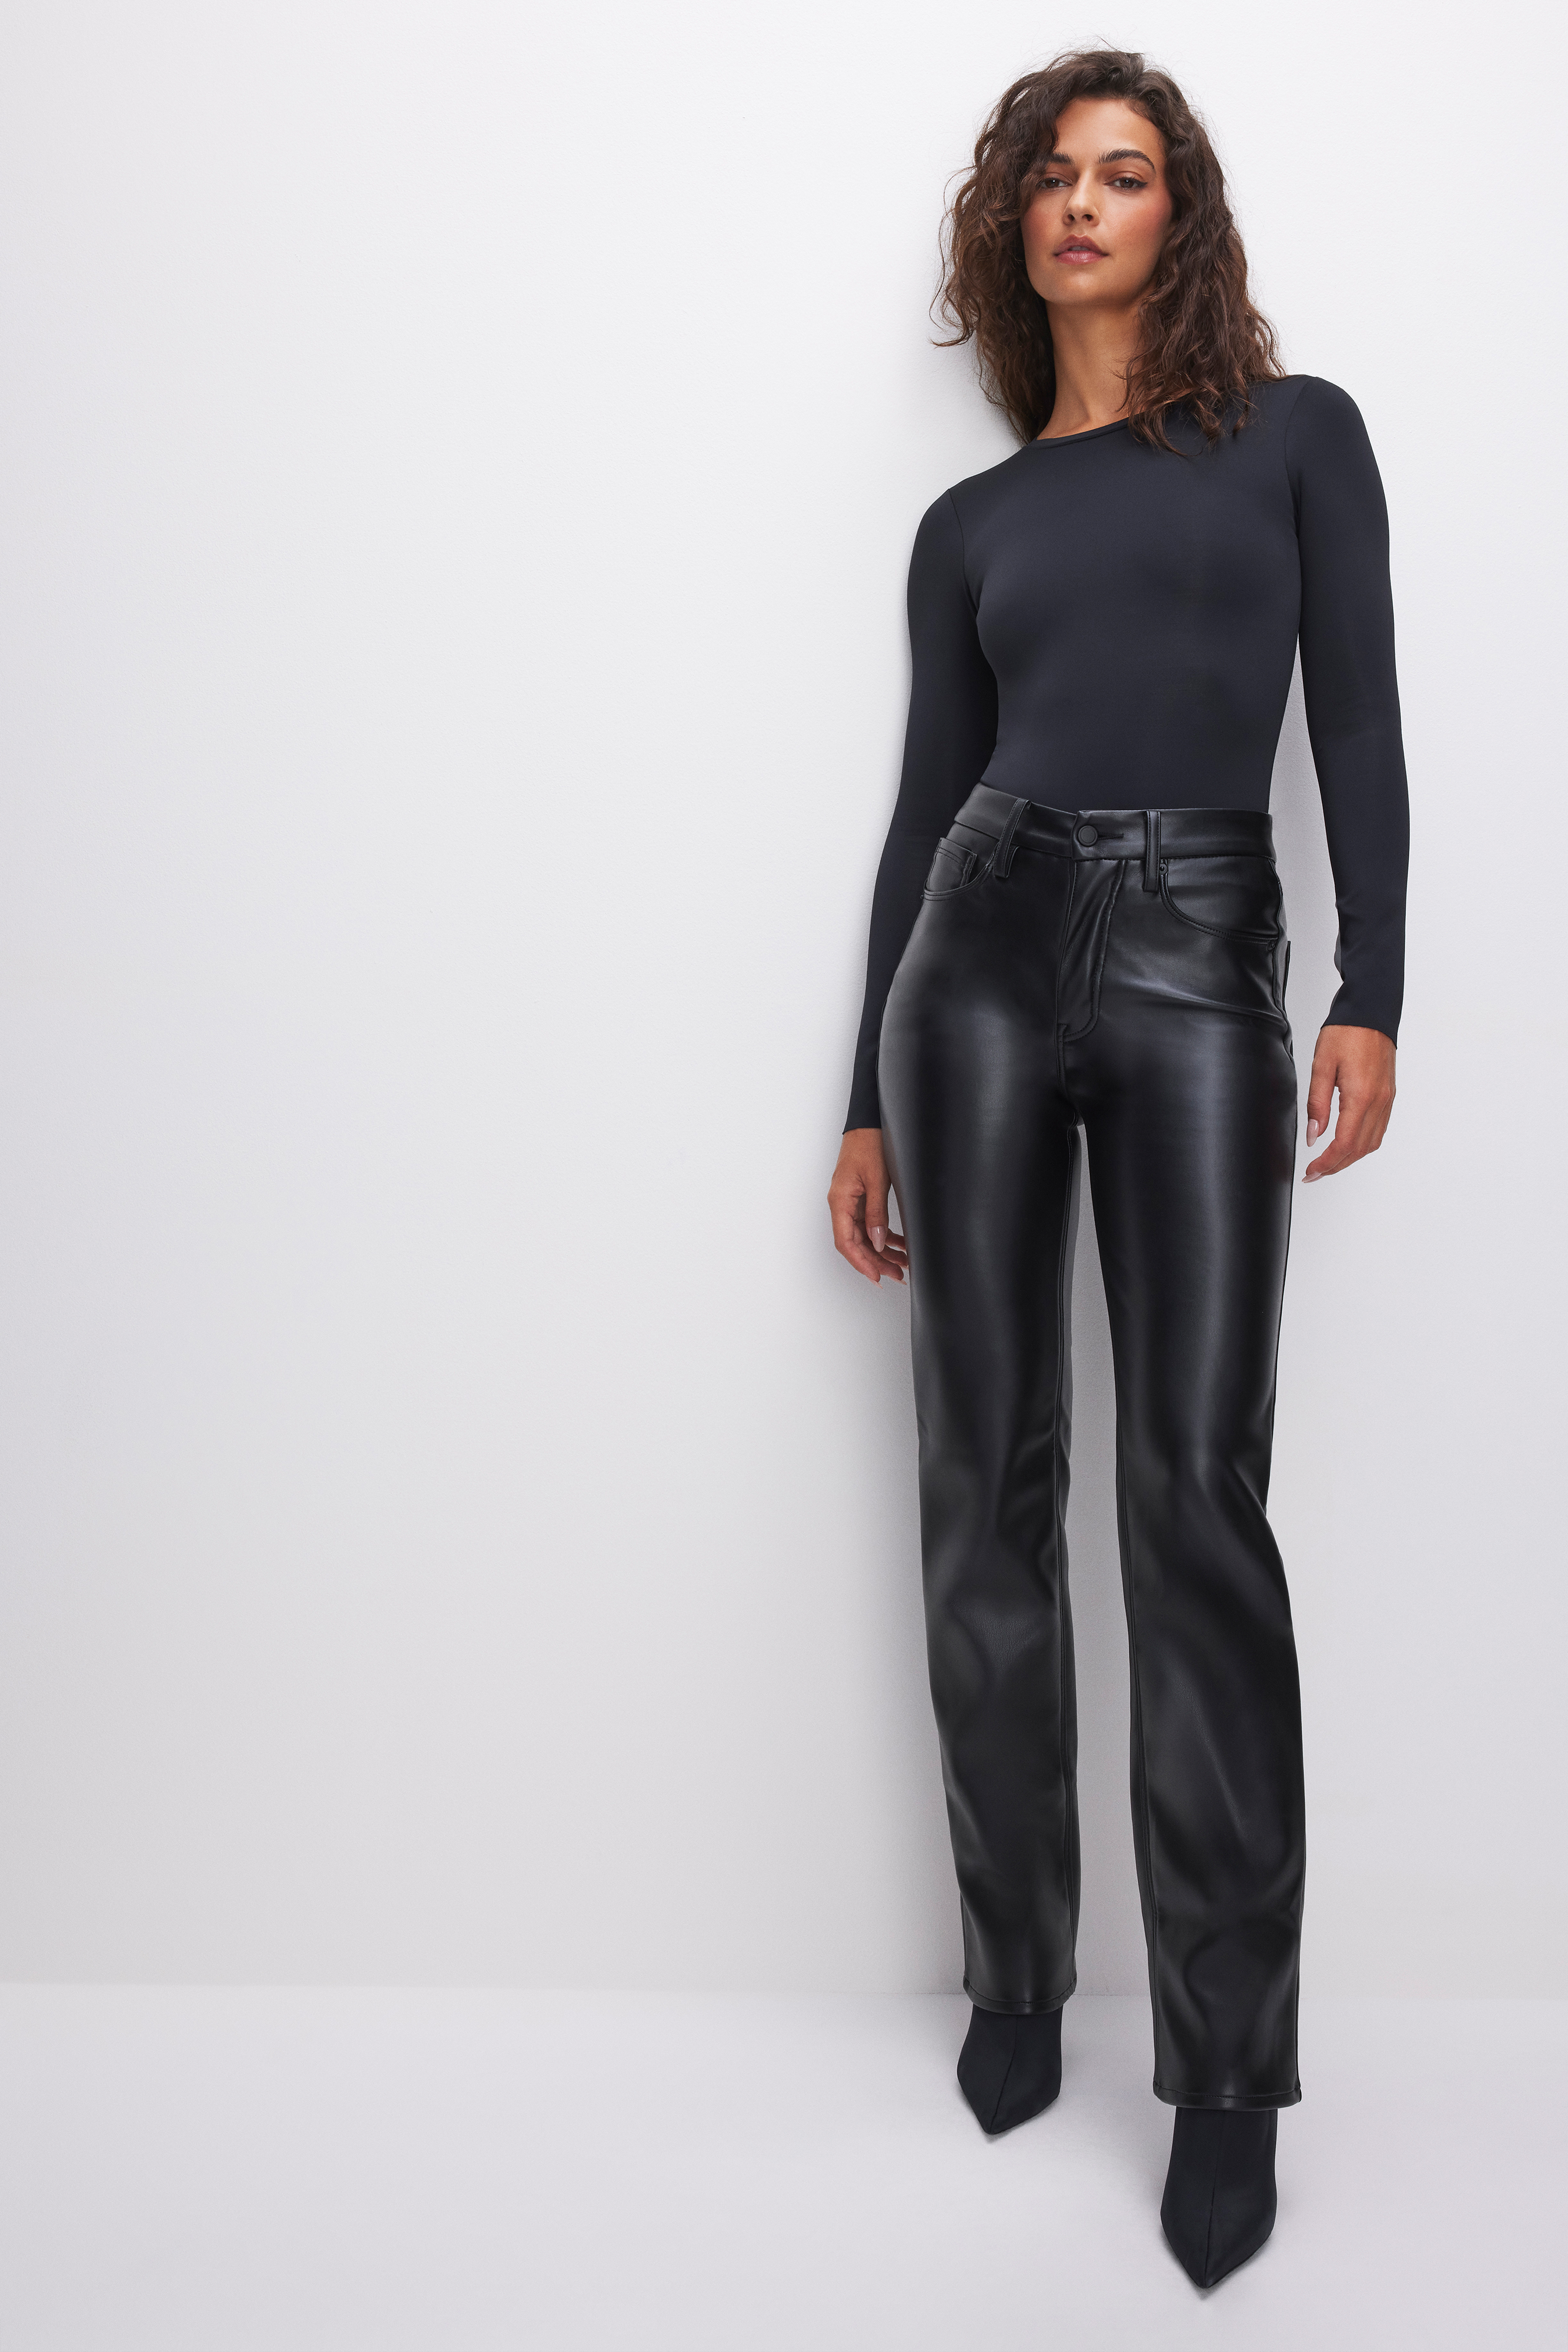 Stradivarius STR faux leather straight leg pants in washed black